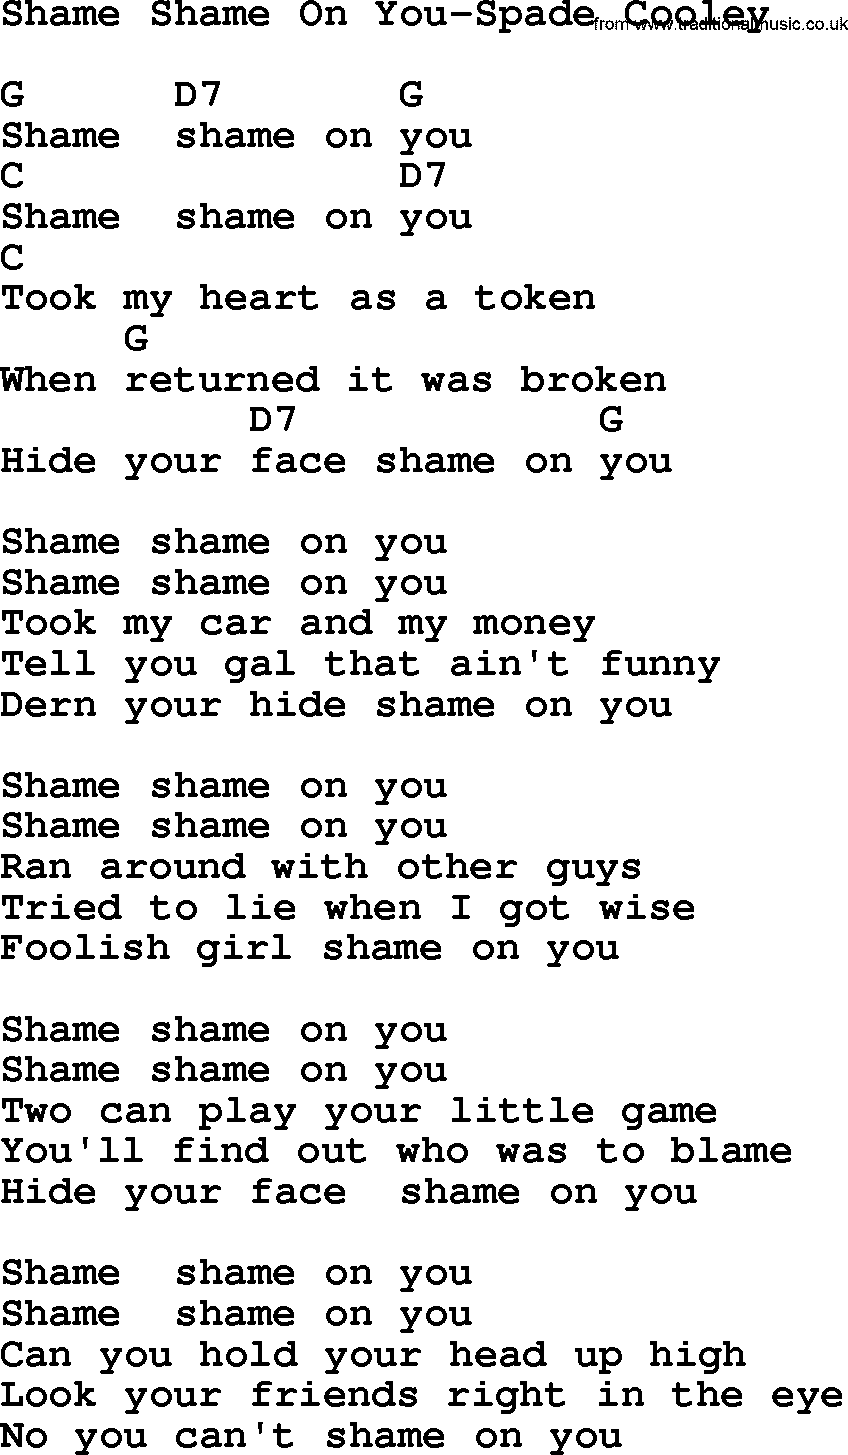 Country music song: Shame Shame On You-Spade Cooley lyrics and chords